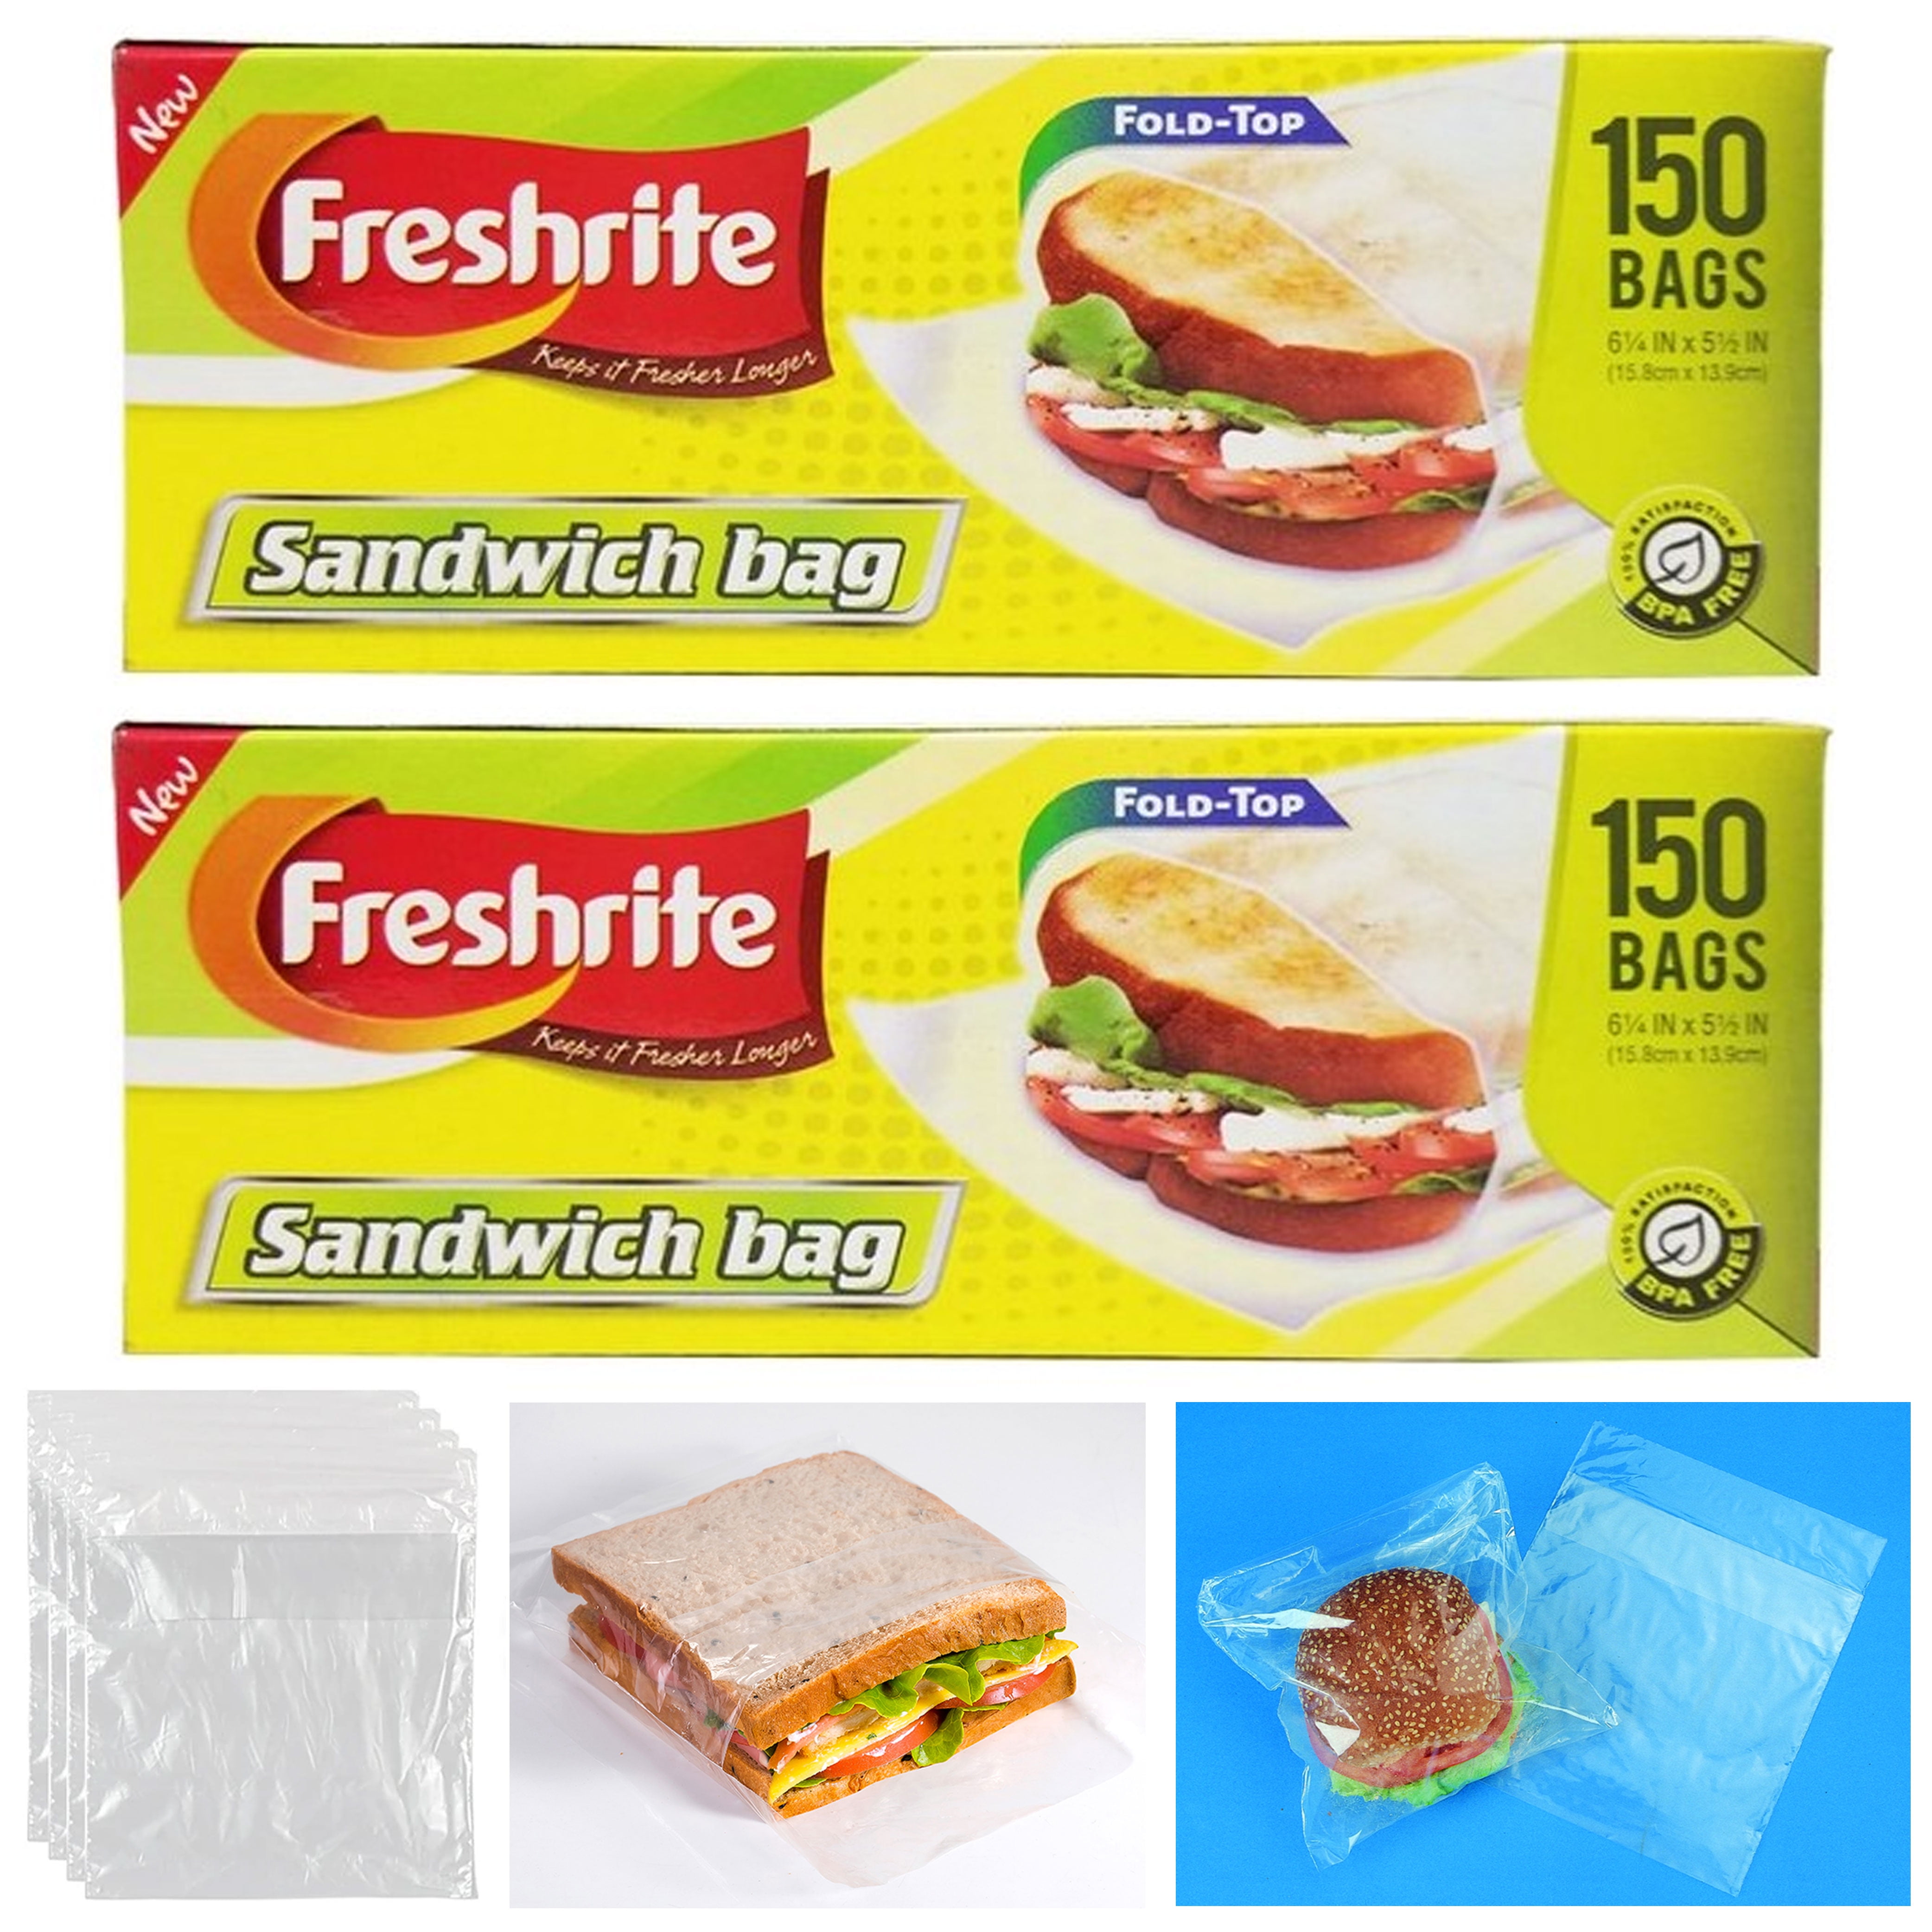 Cookies Sandwich Traveling Vacation Fruits ProPack Disposable Plastic Sandwich Bags with Fold Close Top 600 Bags 2 Packs Or Any Snacks Cake Office Nuts Great for Home 